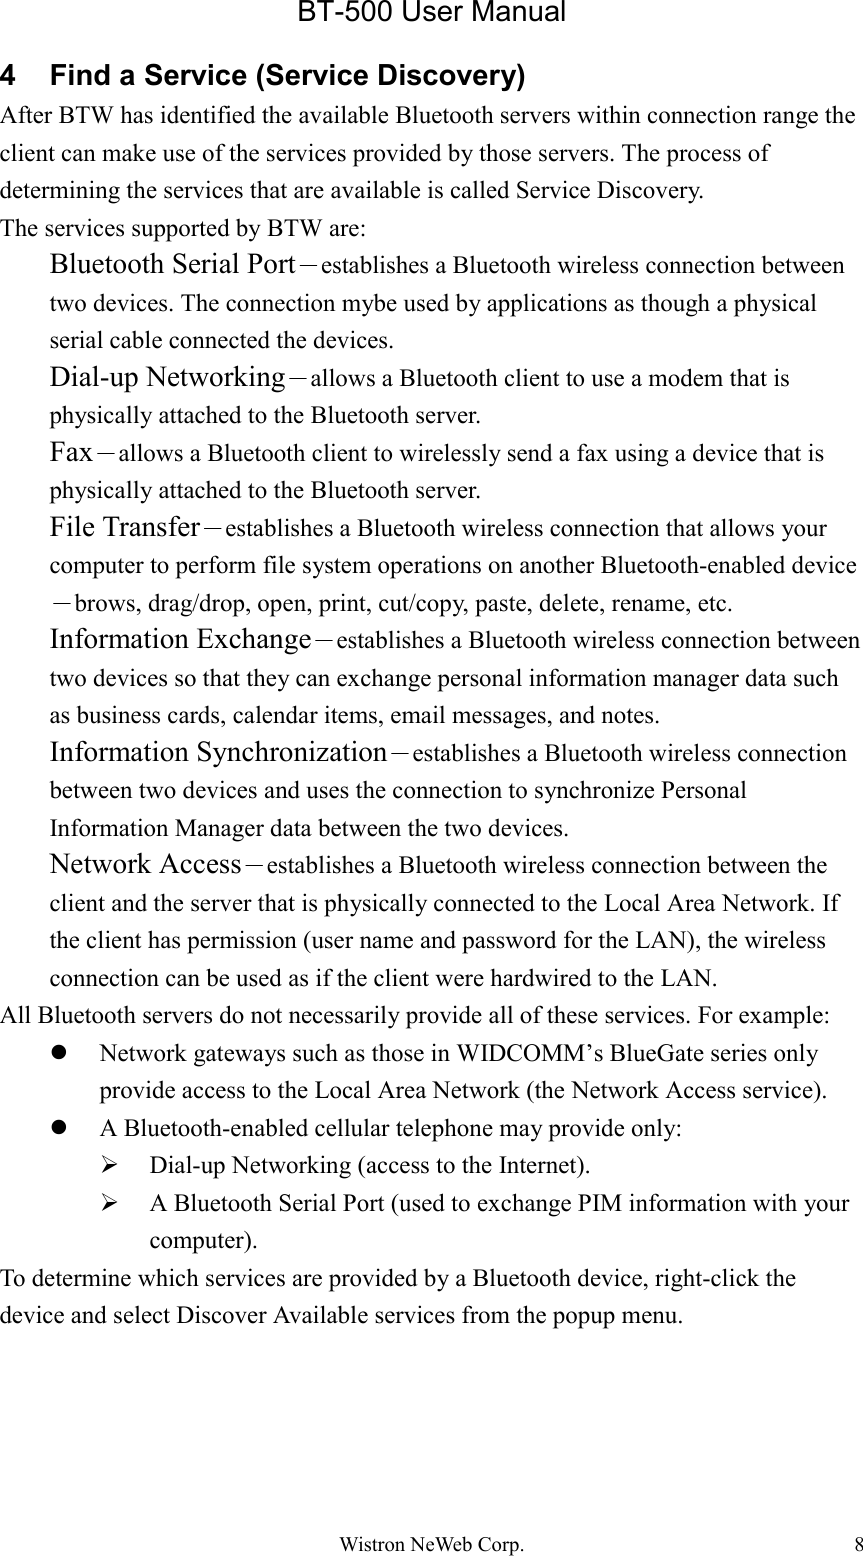 BT-500 User ManualWistron NeWeb Corp. 84  Find a Service (Service Discovery)After BTW has identified the available Bluetooth servers within connection range theclient can make use of the services provided by those servers. The process ofdetermining the services that are available is called Service Discovery.The services supported by BTW are:Bluetooth Serial Port－establishes a Bluetooth wireless connection betweentwo devices. The connection mybe used by applications as though a physicalserial cable connected the devices.Dial-up Networking－allows a Bluetooth client to use a modem that isphysically attached to the Bluetooth server.Fax－allows a Bluetooth client to wirelessly send a fax using a device that isphysically attached to the Bluetooth server.File Transfer－establishes a Bluetooth wireless connection that allows yourcomputer to perform file system operations on another Bluetooth-enabled device－brows, drag/drop, open, print, cut/copy, paste, delete, rename, etc.Information Exchange－establishes a Bluetooth wireless connection betweentwo devices so that they can exchange personal information manager data suchas business cards, calendar items, email messages, and notes.Information Synchronization－establishes a Bluetooth wireless connectionbetween two devices and uses the connection to synchronize PersonalInformation Manager data between the two devices.Network Access－establishes a Bluetooth wireless connection between theclient and the server that is physically connected to the Local Area Network. Ifthe client has permission (user name and password for the LAN), the wirelessconnection can be used as if the client were hardwired to the LAN.All Bluetooth servers do not necessarily provide all of these services. For example:z Network gateways such as those in WIDCOMM’s BlueGate series onlyprovide access to the Local Area Network (the Network Access service).z A Bluetooth-enabled cellular telephone may provide only:¾ Dial-up Networking (access to the Internet).¾ A Bluetooth Serial Port (used to exchange PIM information with yourcomputer).To determine which services are provided by a Bluetooth device, right-click thedevice and select Discover Available services from the popup menu.